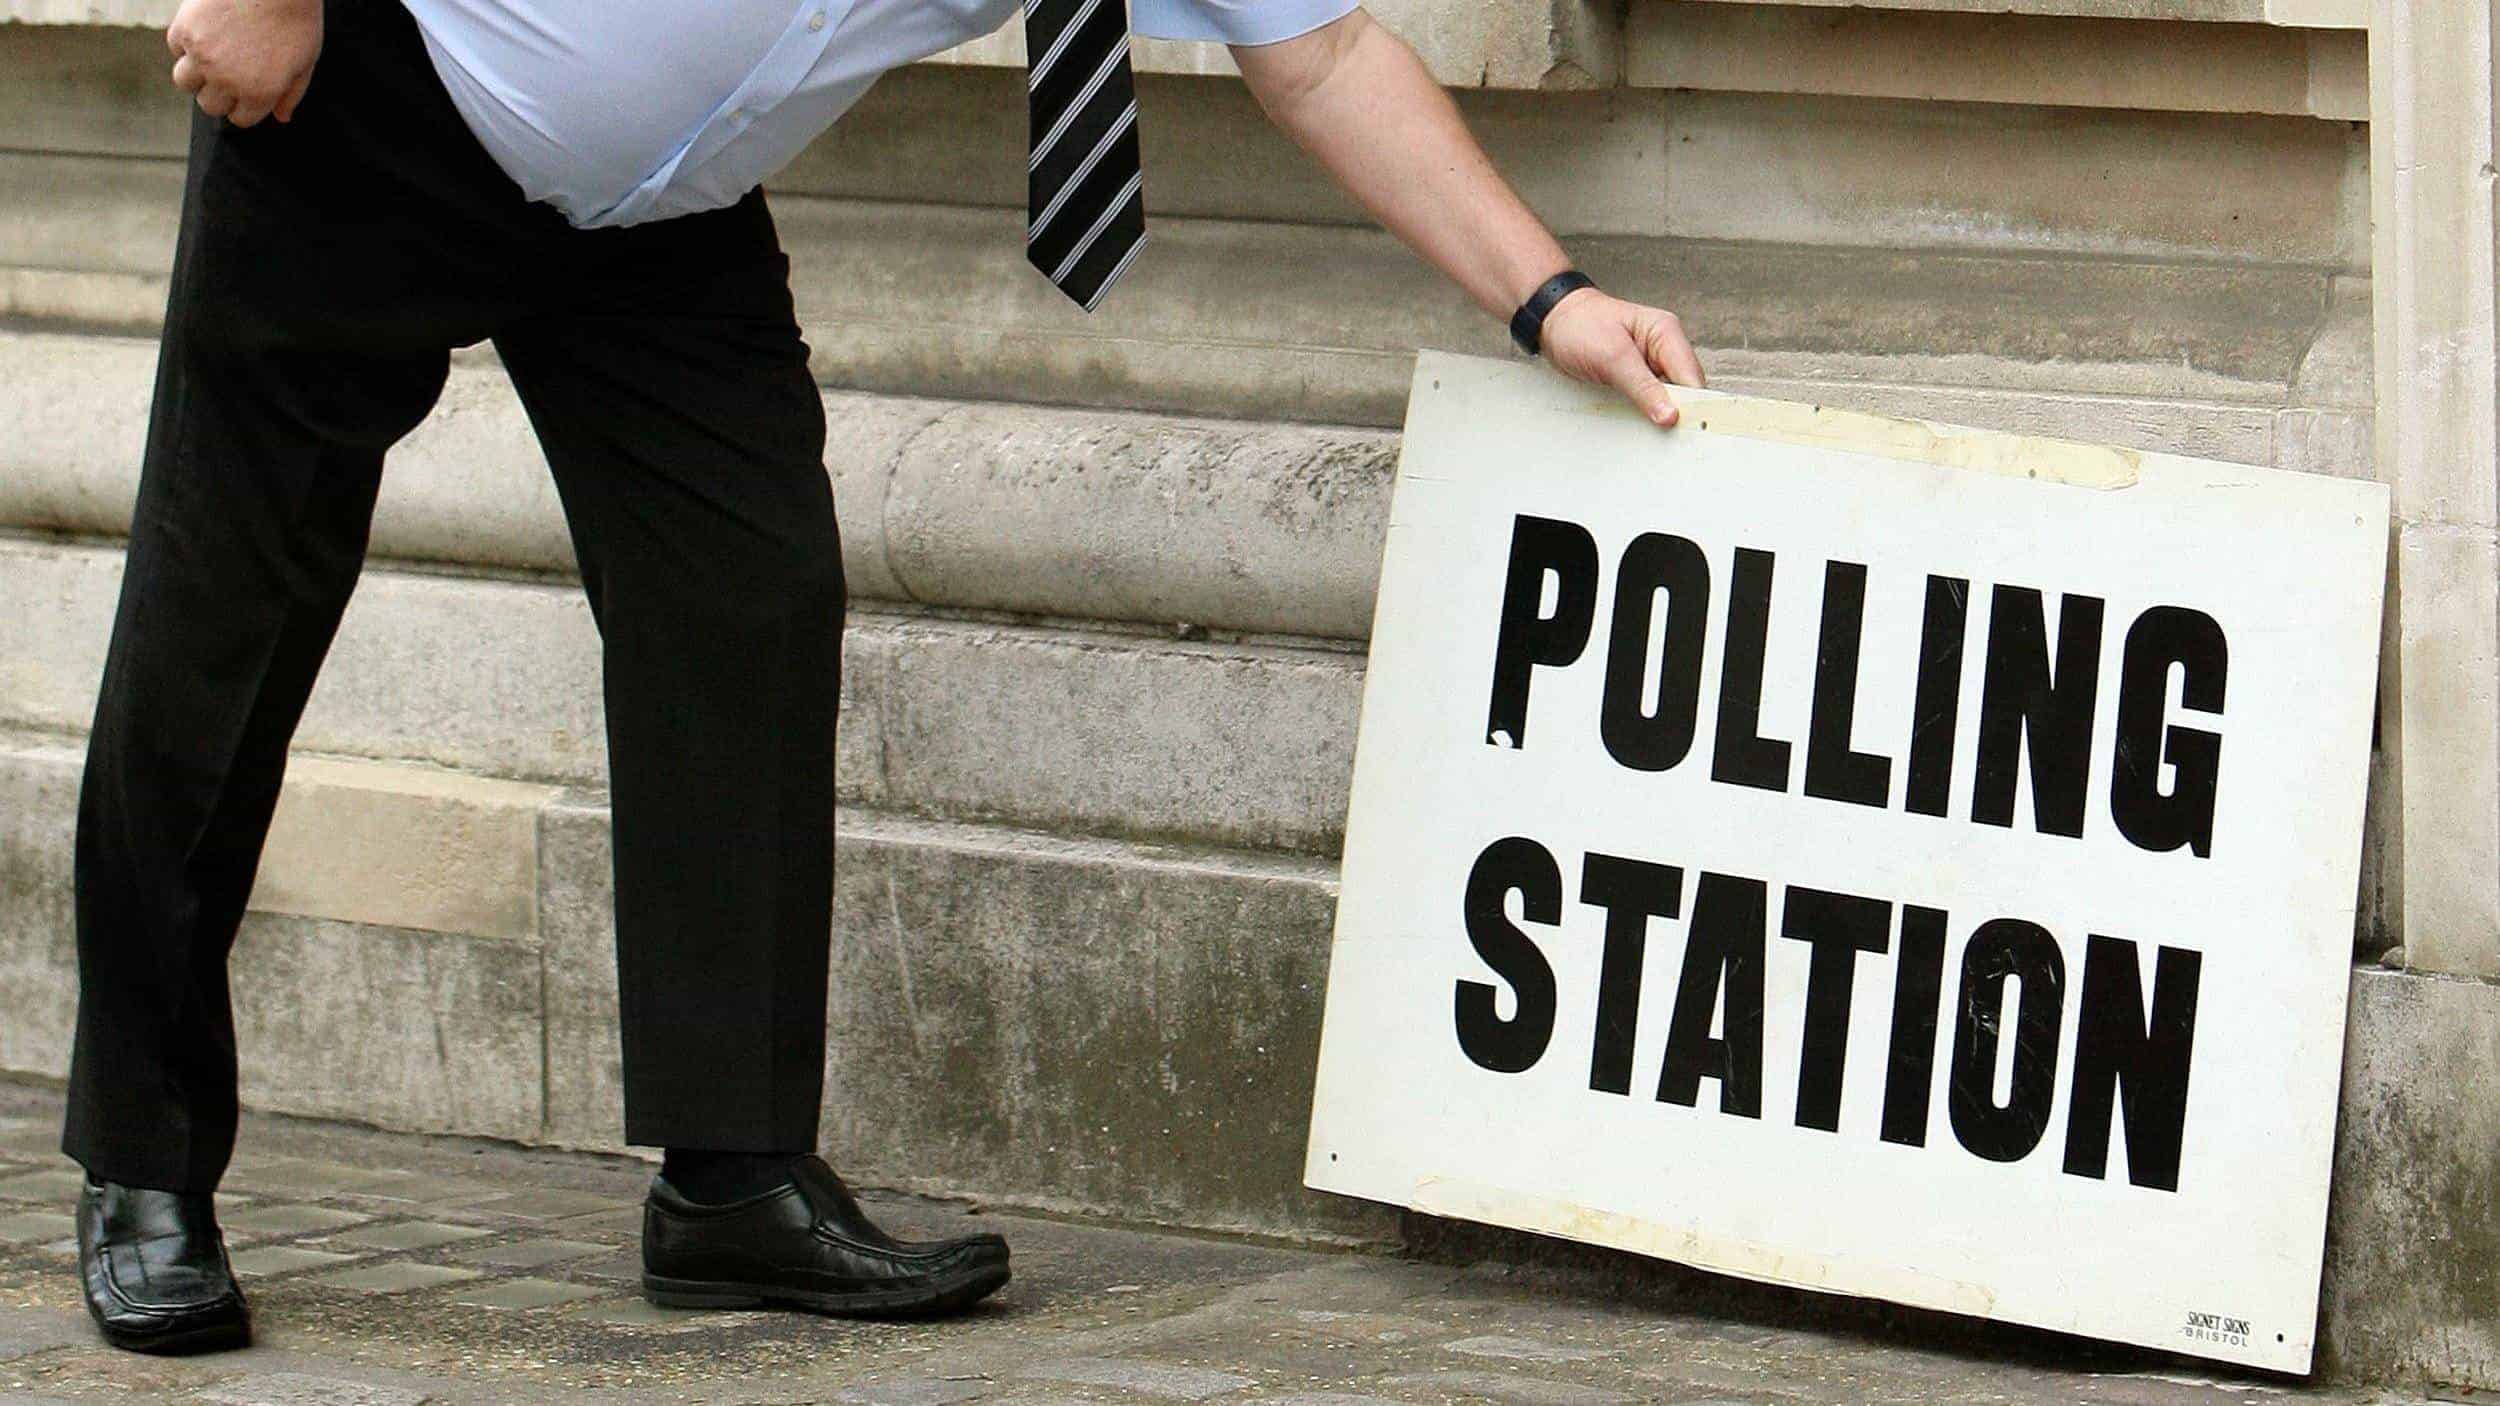 One in three Brits voted tactically in December election, new research shows